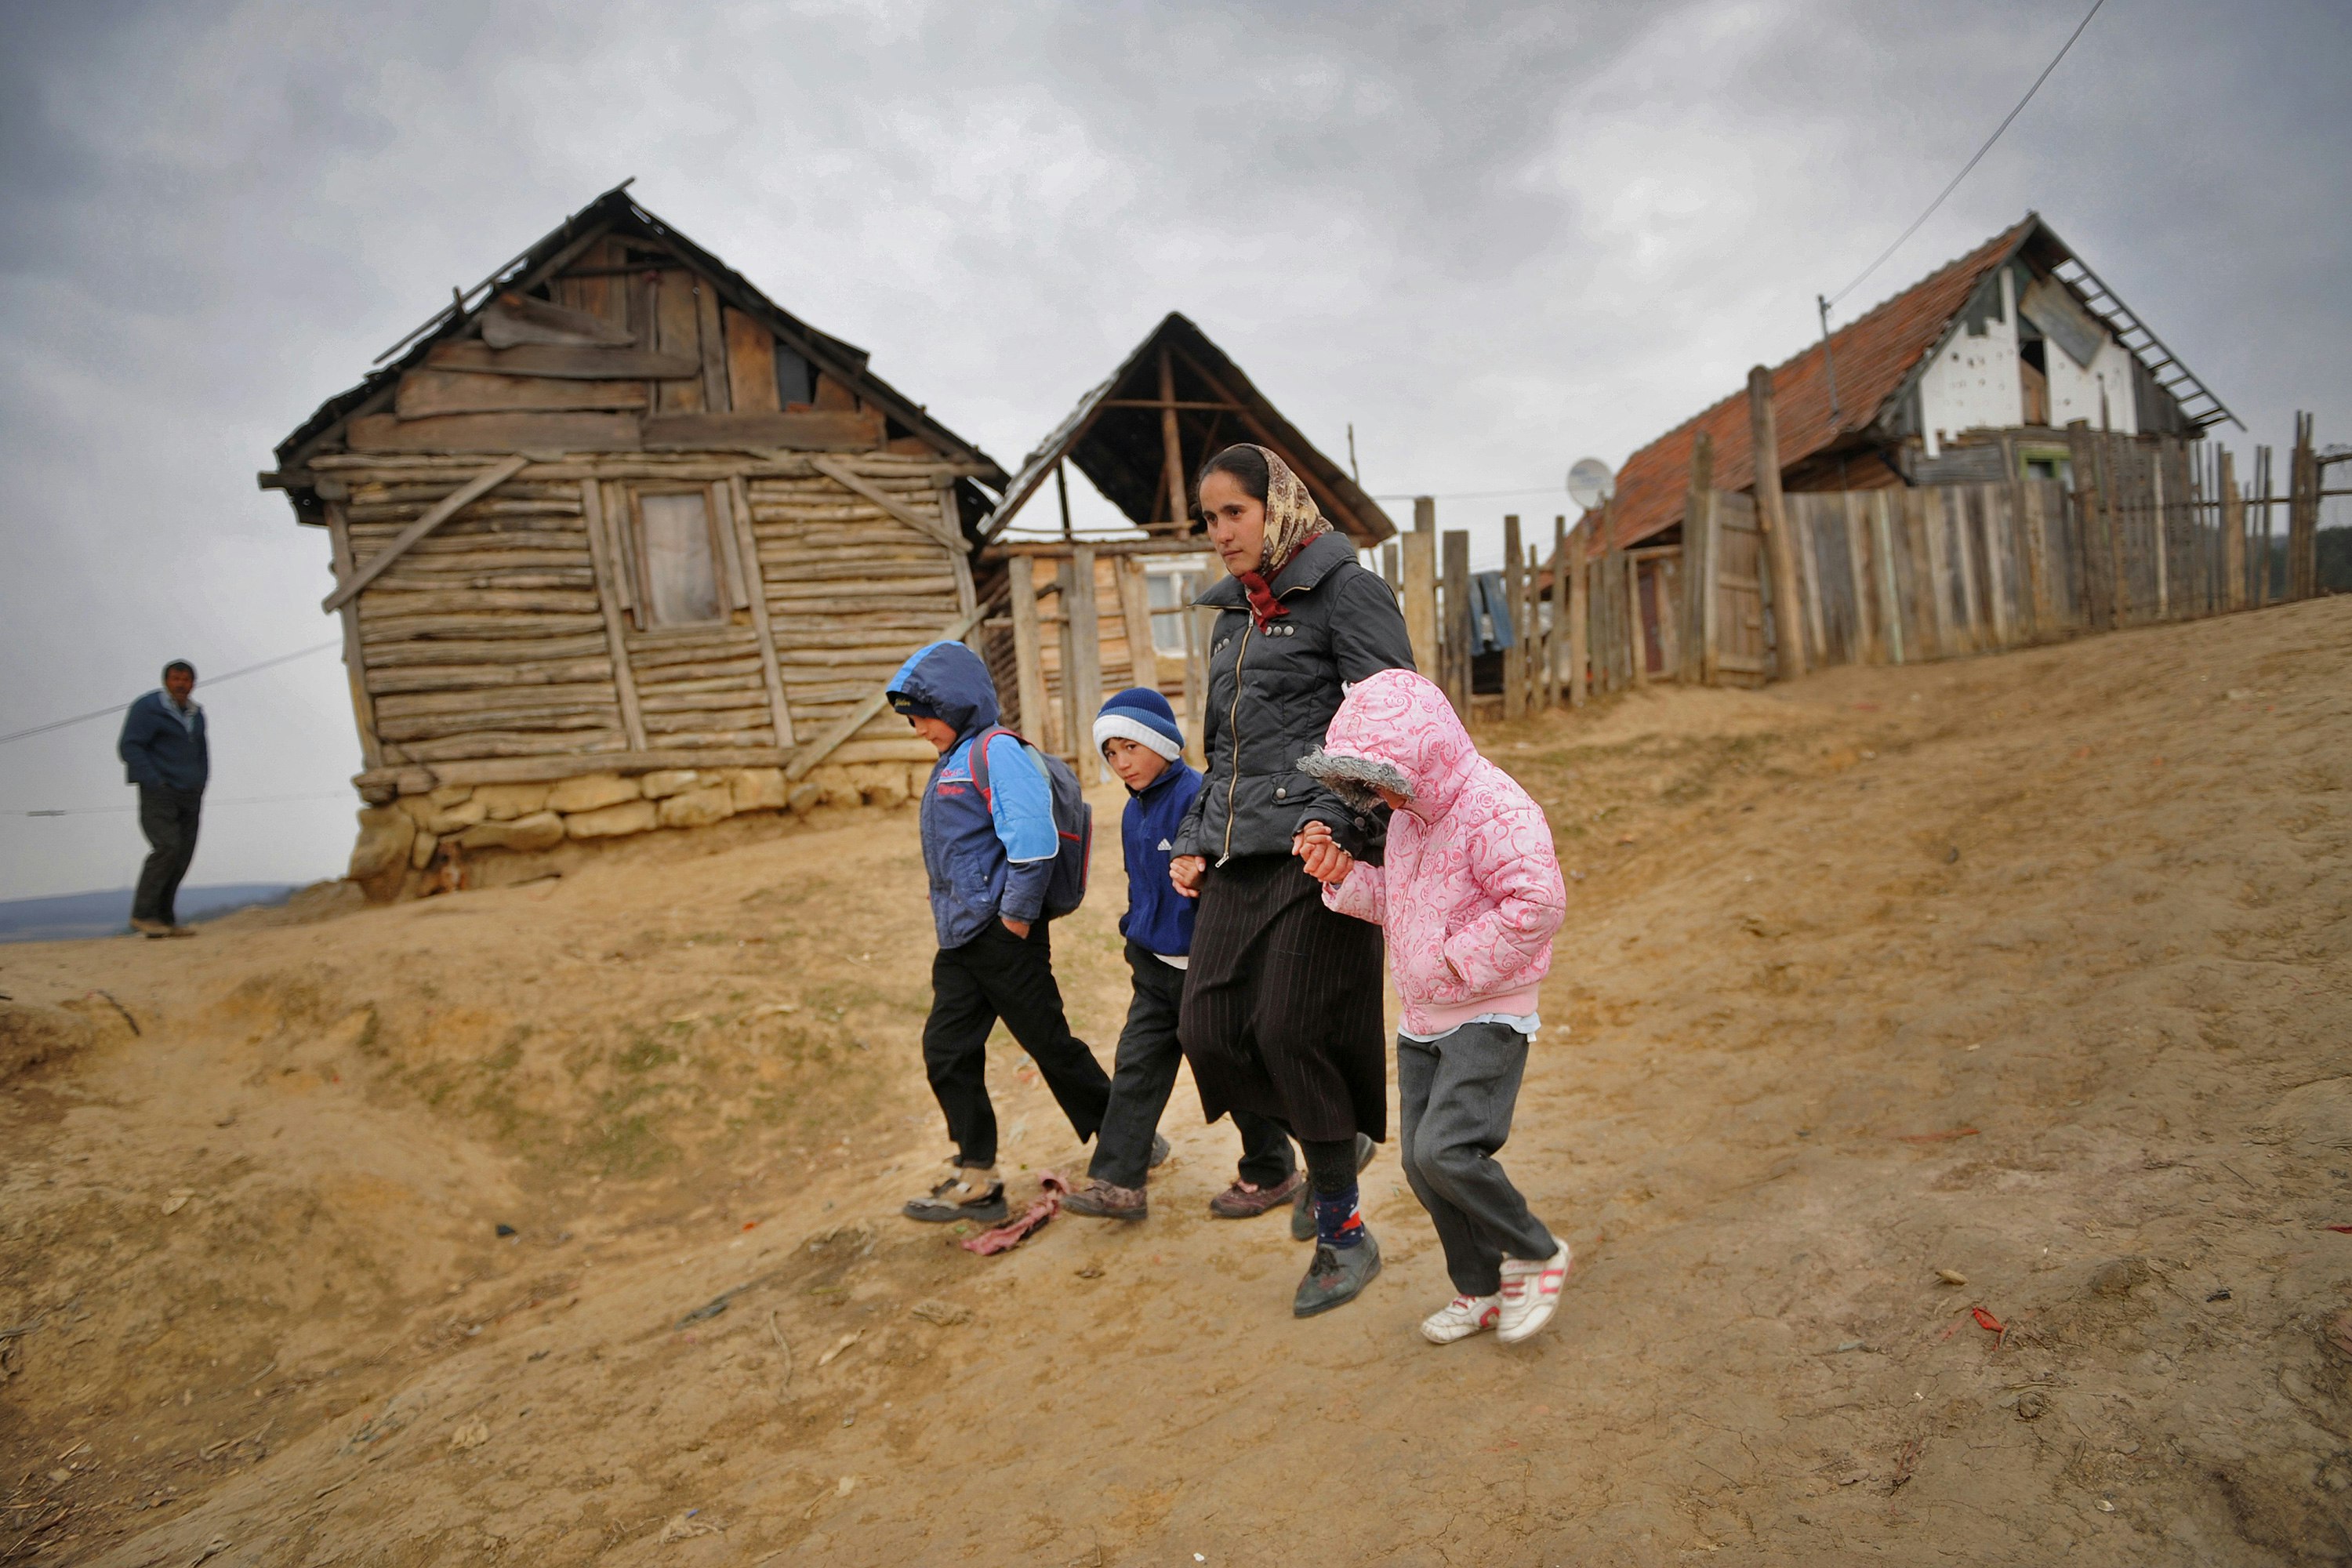 A woman and three children walking on an unpaved road